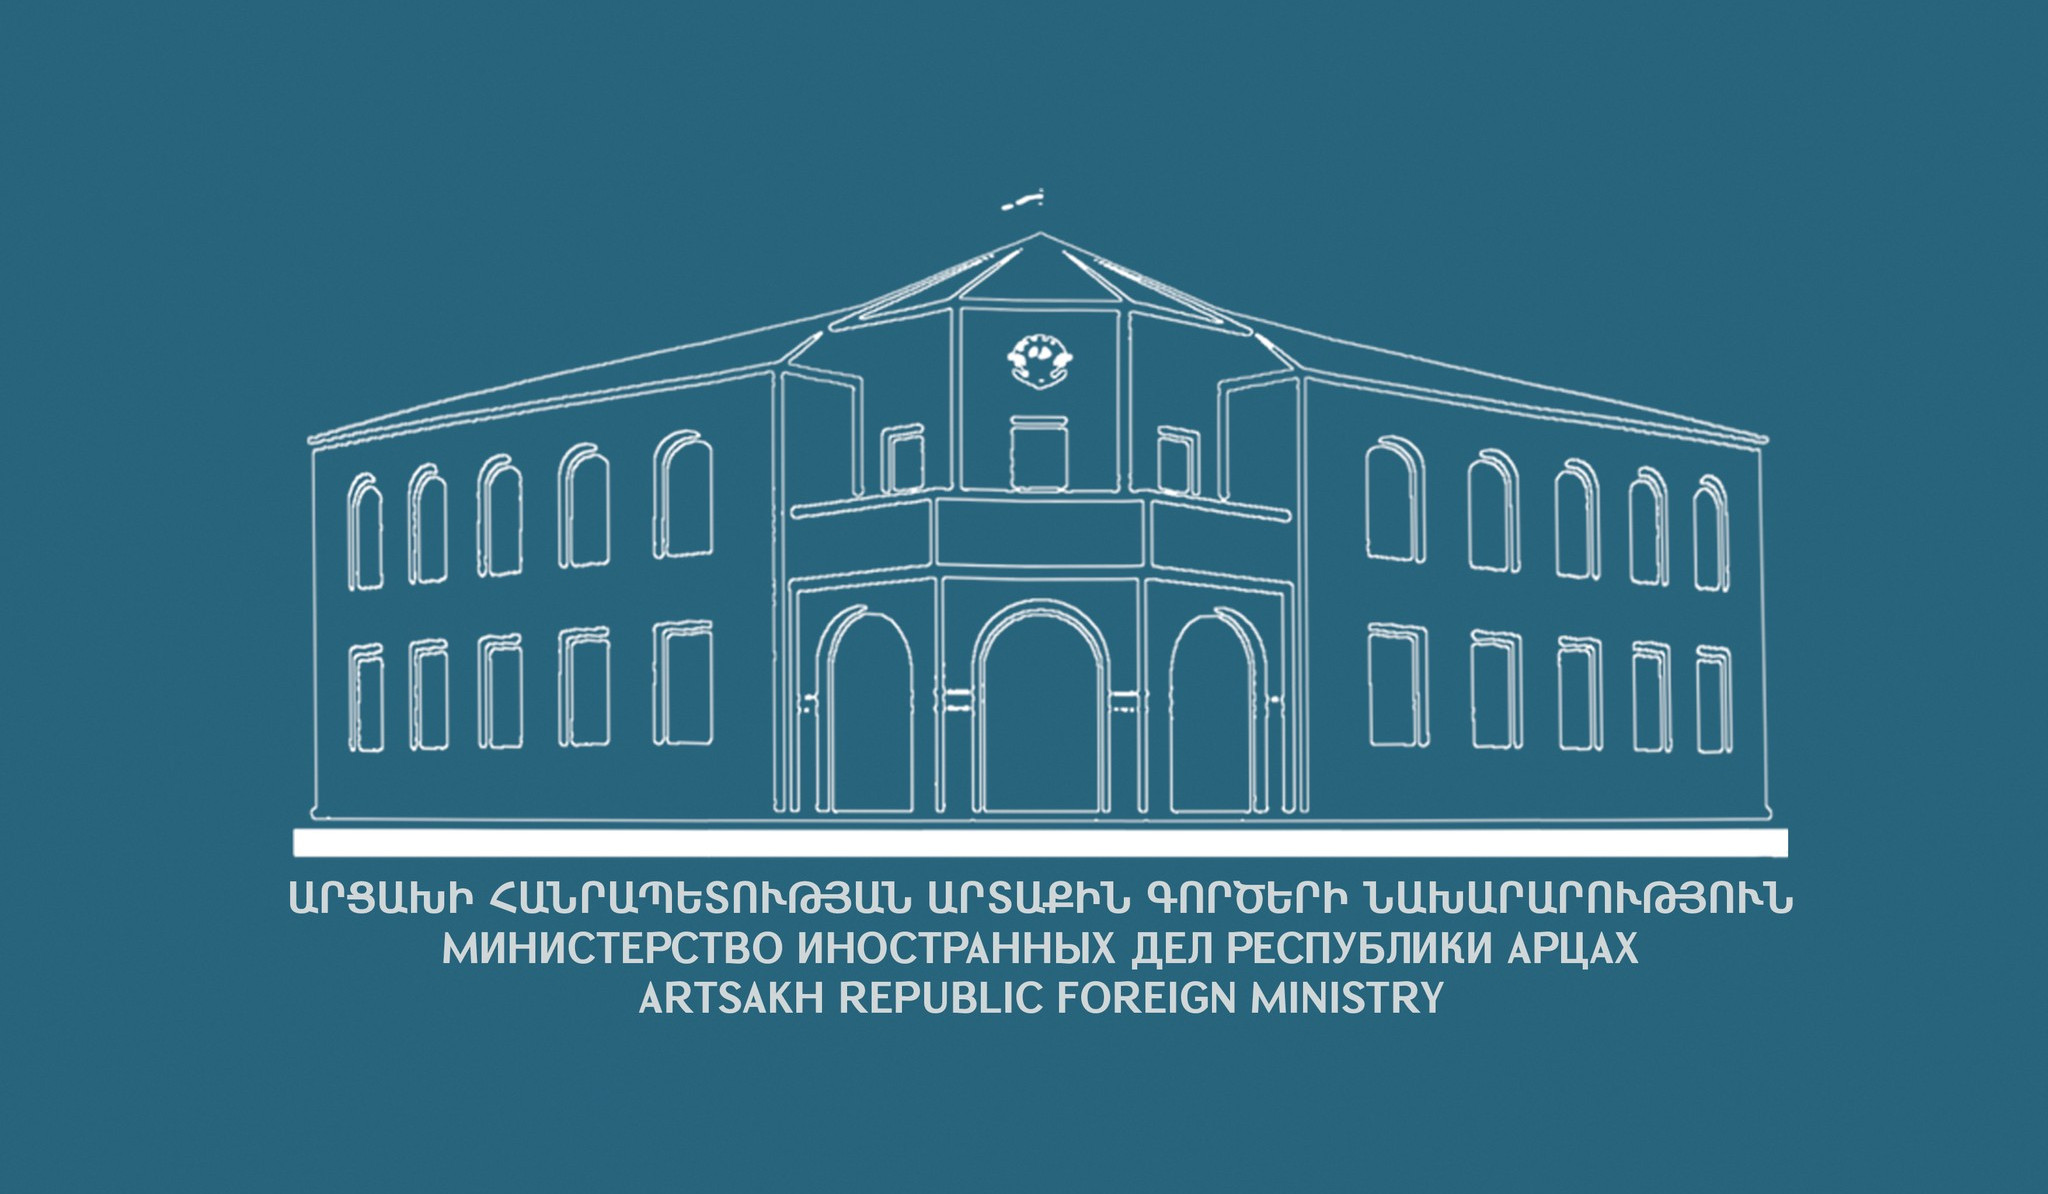 Statement of Foreign Ministry of Nagorno-Karabakh on disinformation spread by Azerbaijan